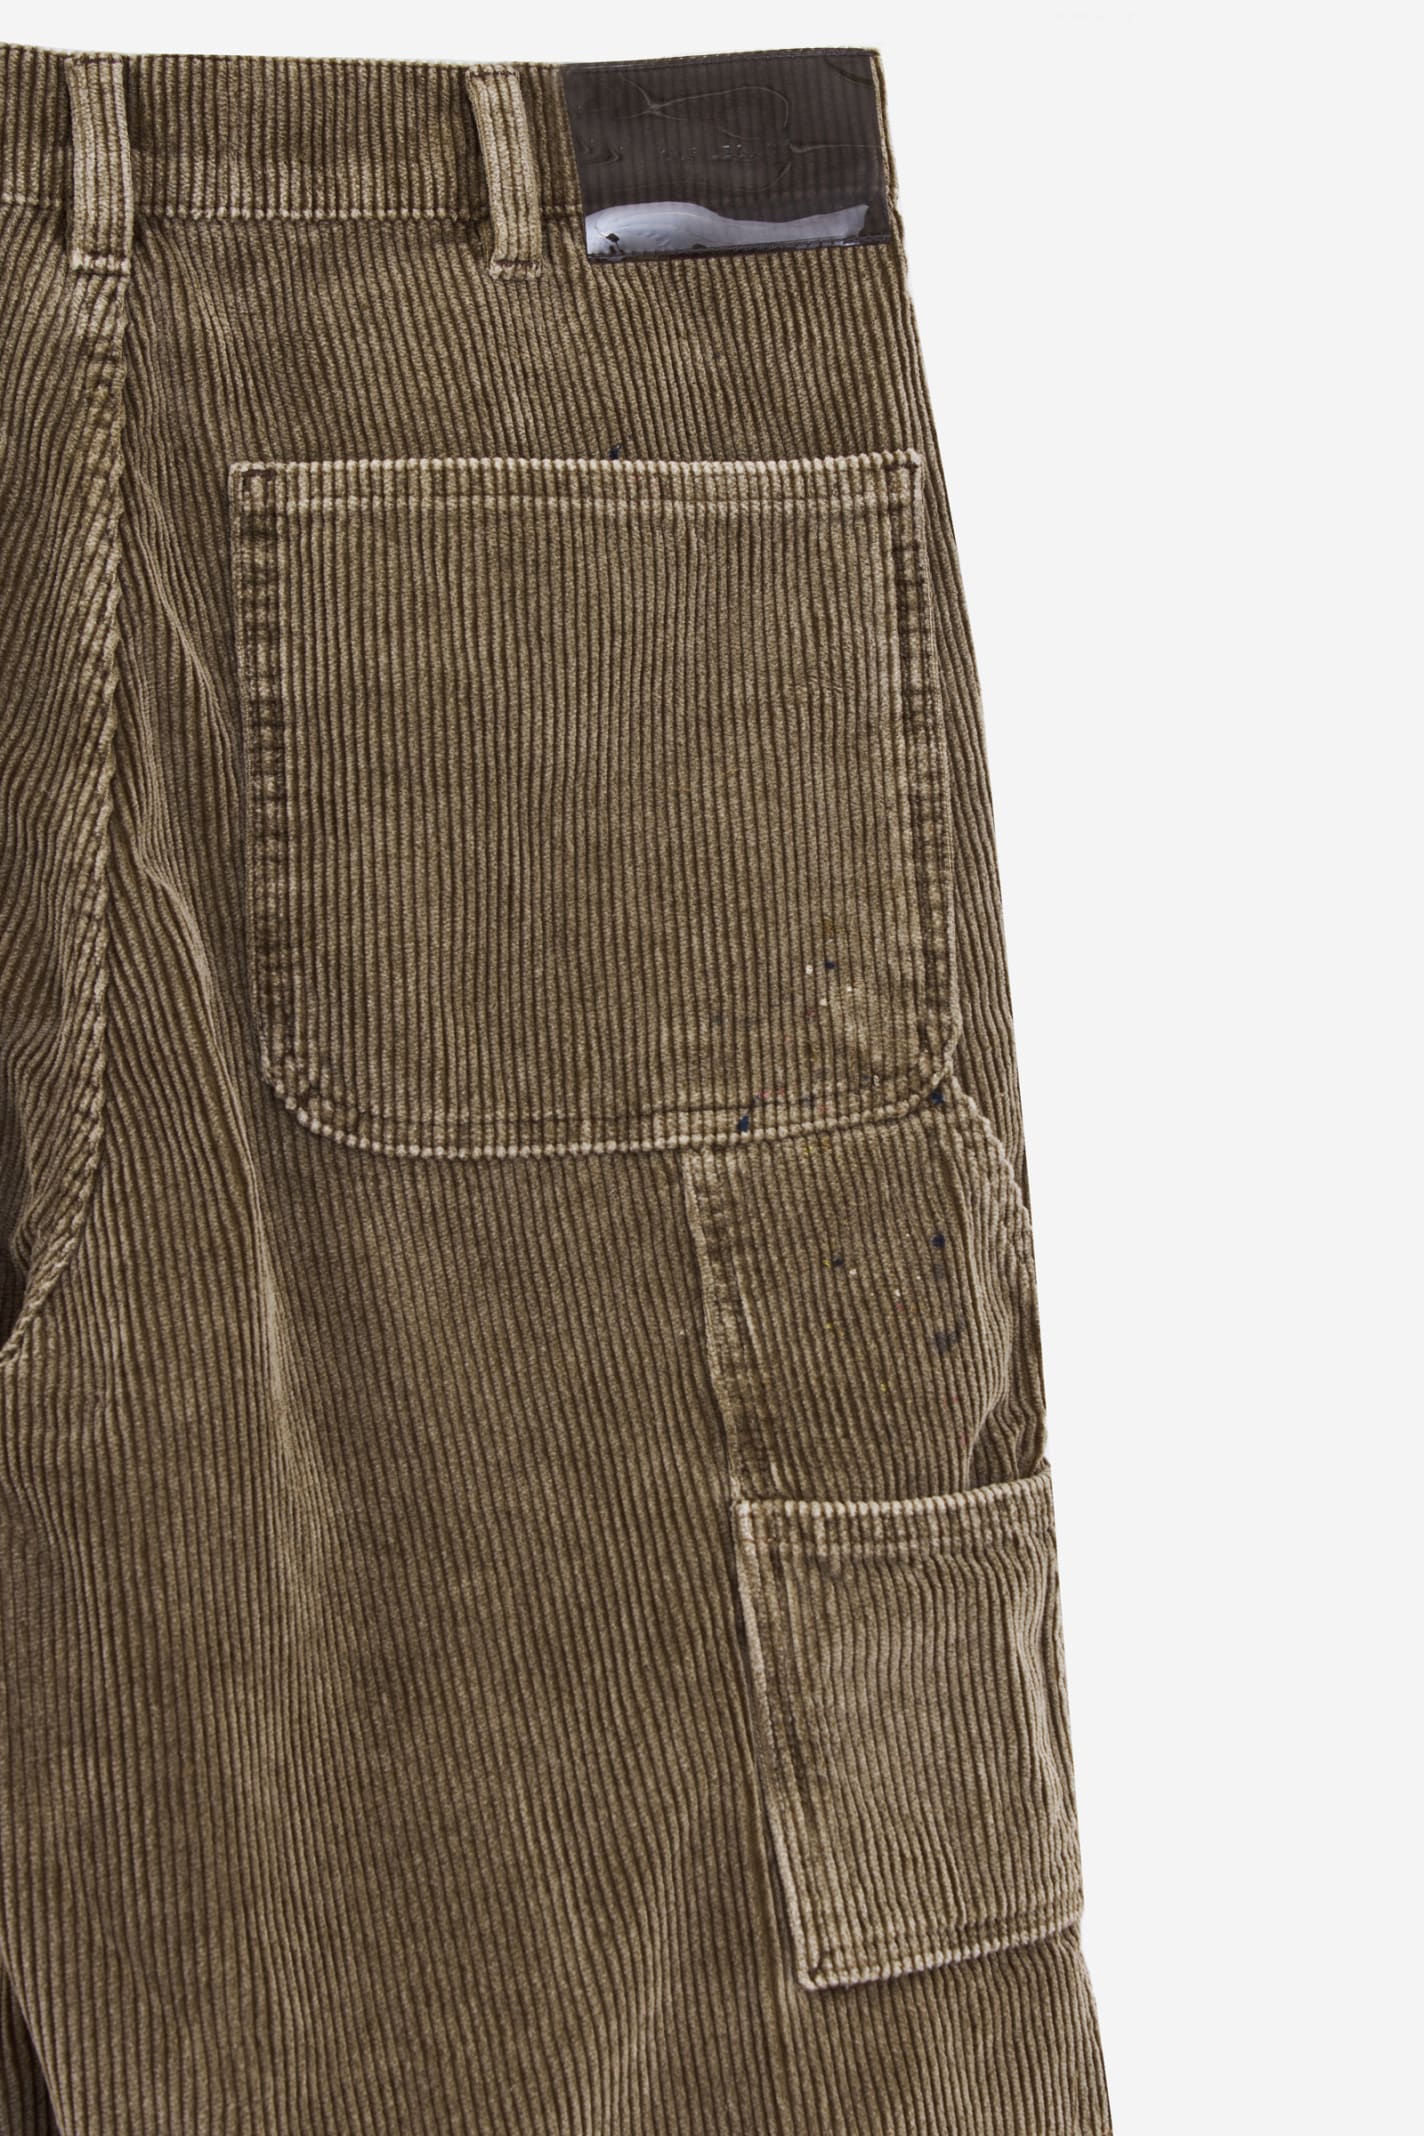 Shop Our Legacy Joiner Shorts In Brown